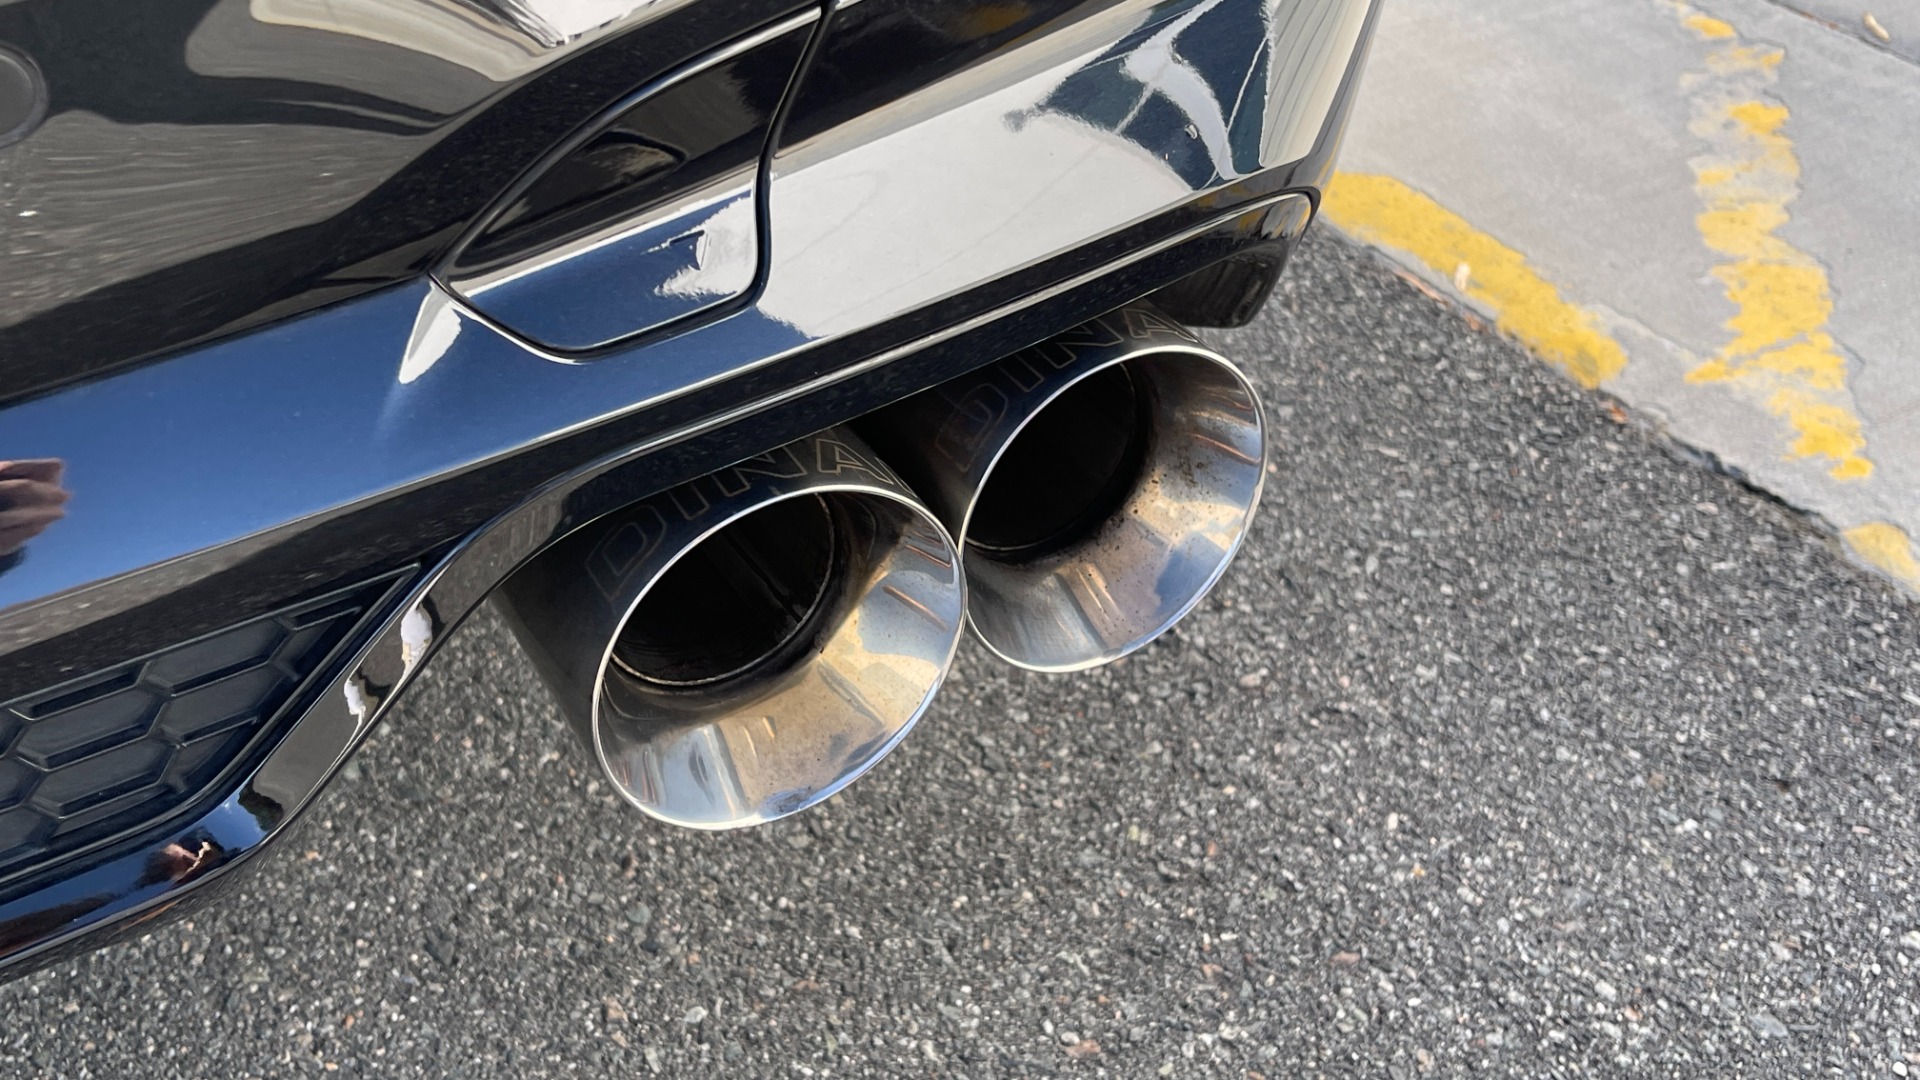 Used 2020 BMW X3 M MERINO LEATHER / EXECUTIVE PACKAGE / DINAN EXHAUST for sale $58,999 at Formula Imports in Charlotte NC 28227 33